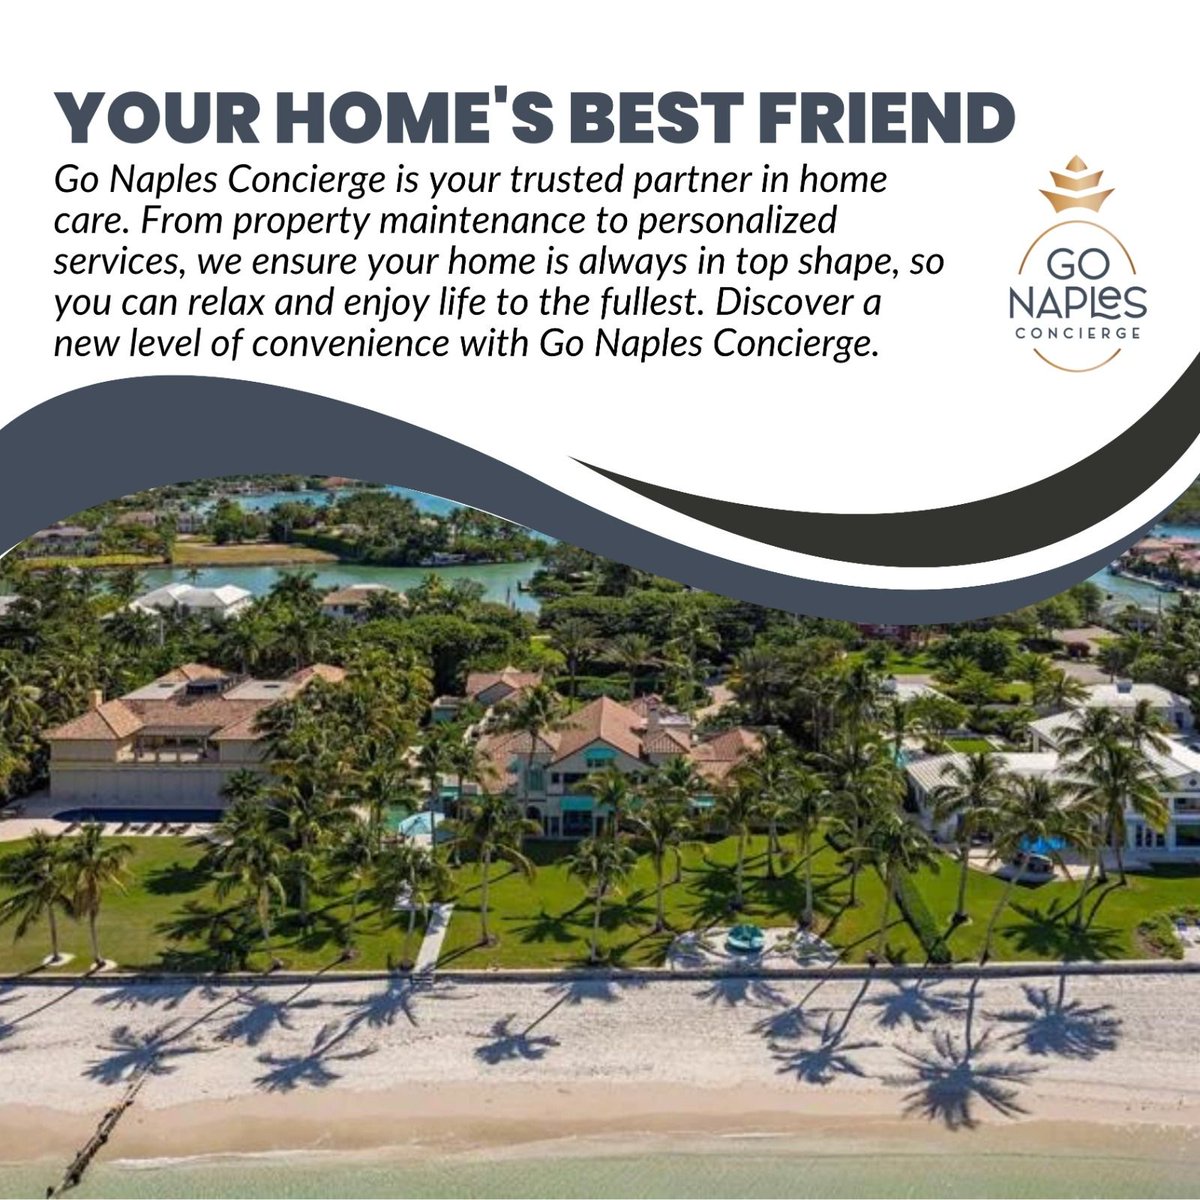 Go Naples Concierge is your trusted partner in home care. 
--
Contact today for peace of mind: (239) 360-3605 | Hello@gonaplesconcierge.com  
.
#ProfessionalServices #NaplesCommunity #NaplesHomeWatch #HomeSecurity #PropertyCare #PersonalizedConcierge